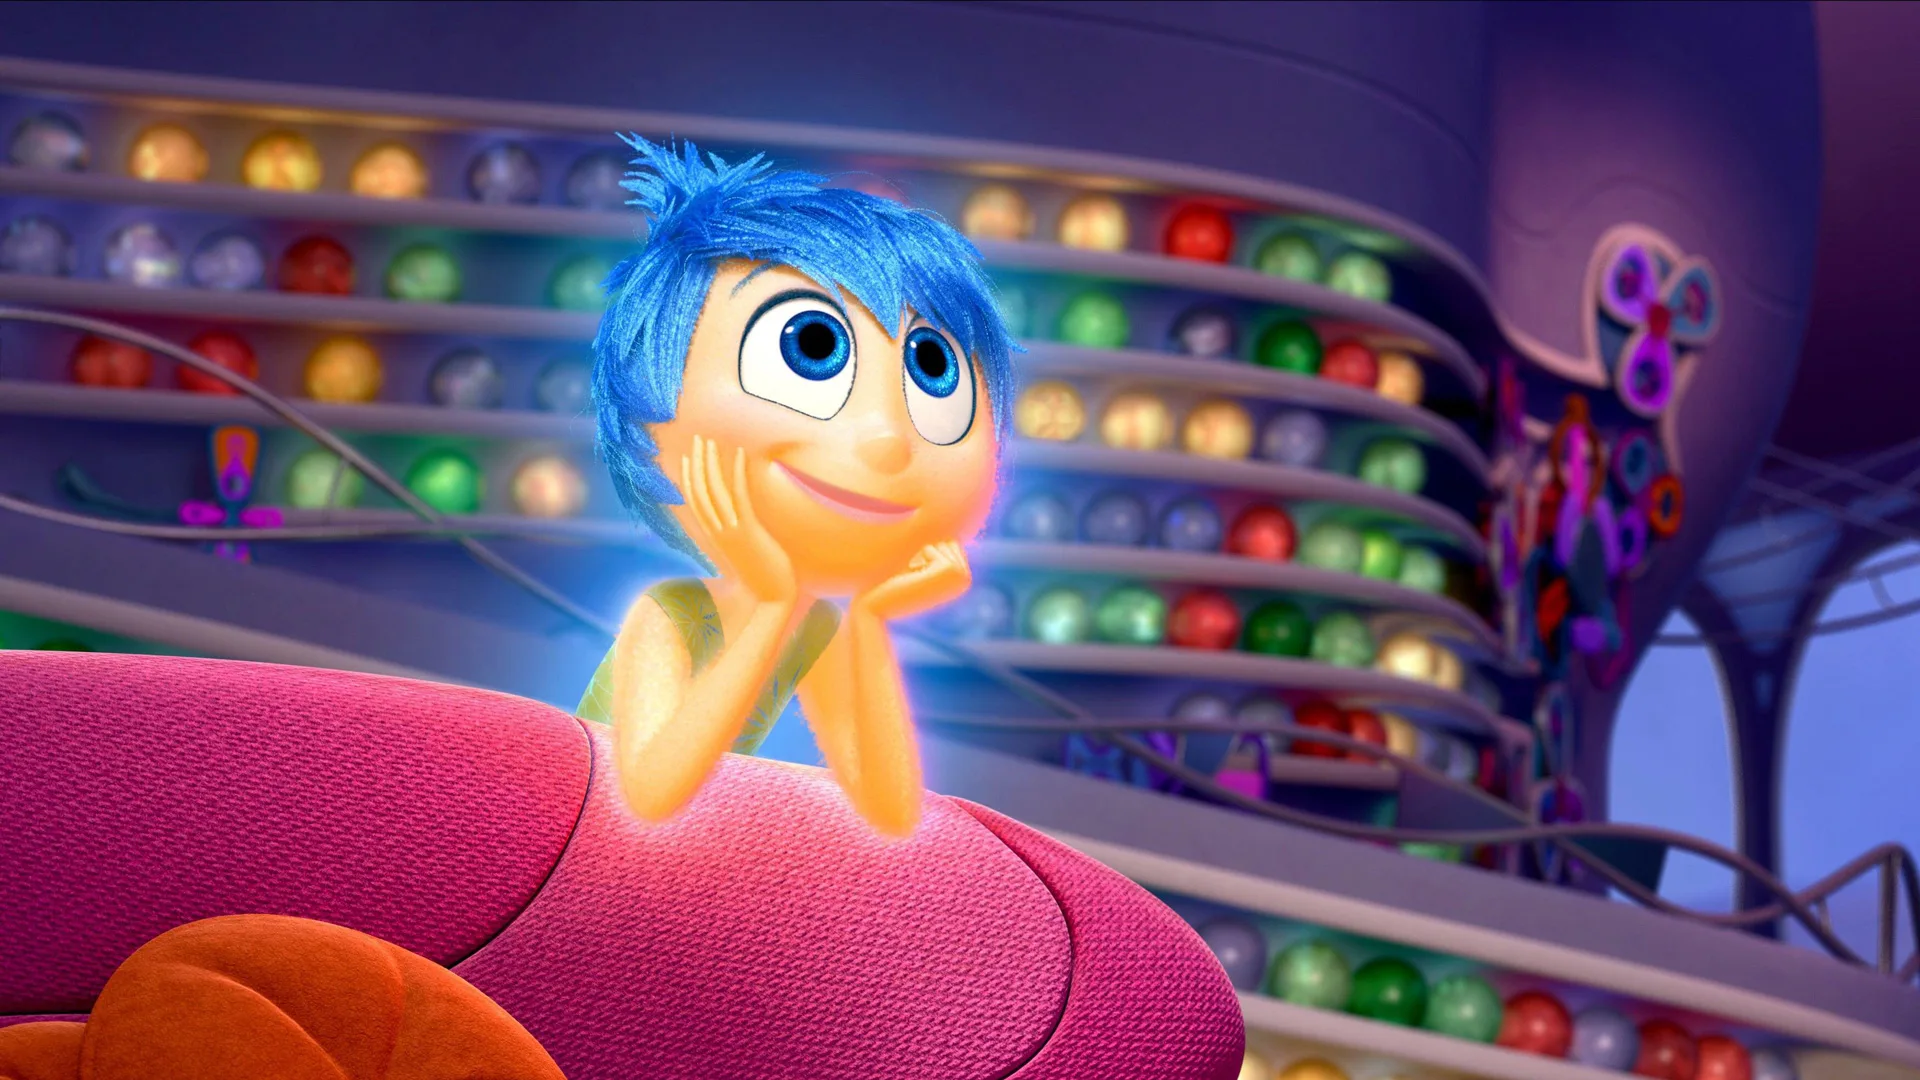 A scene from Inside Out showing Joy smiling with her head in her hands leaning on a pink sofa against a background of memory balls on shelves